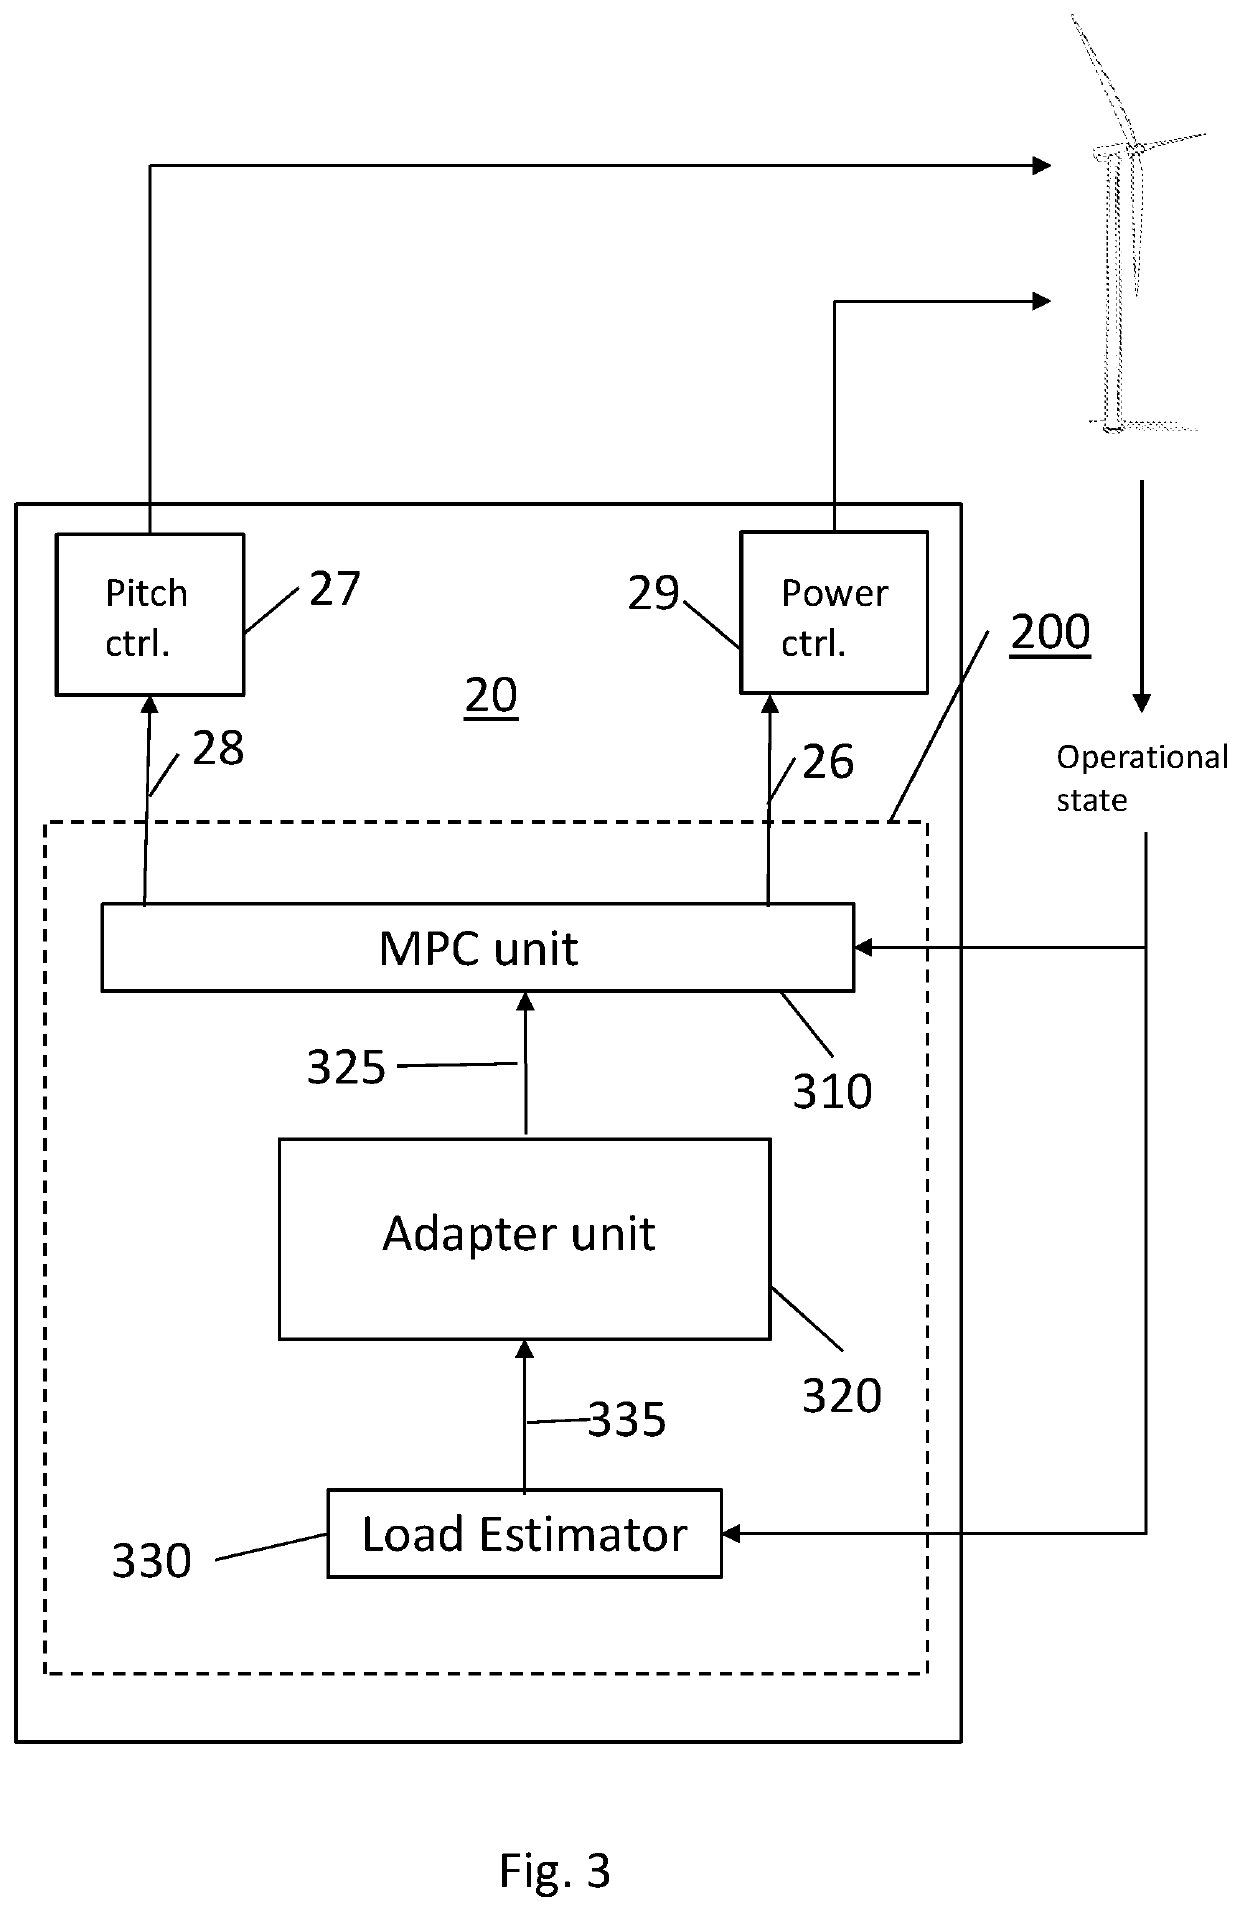 Modifying control strategy for control of a wind turbine using load probability and design load limit